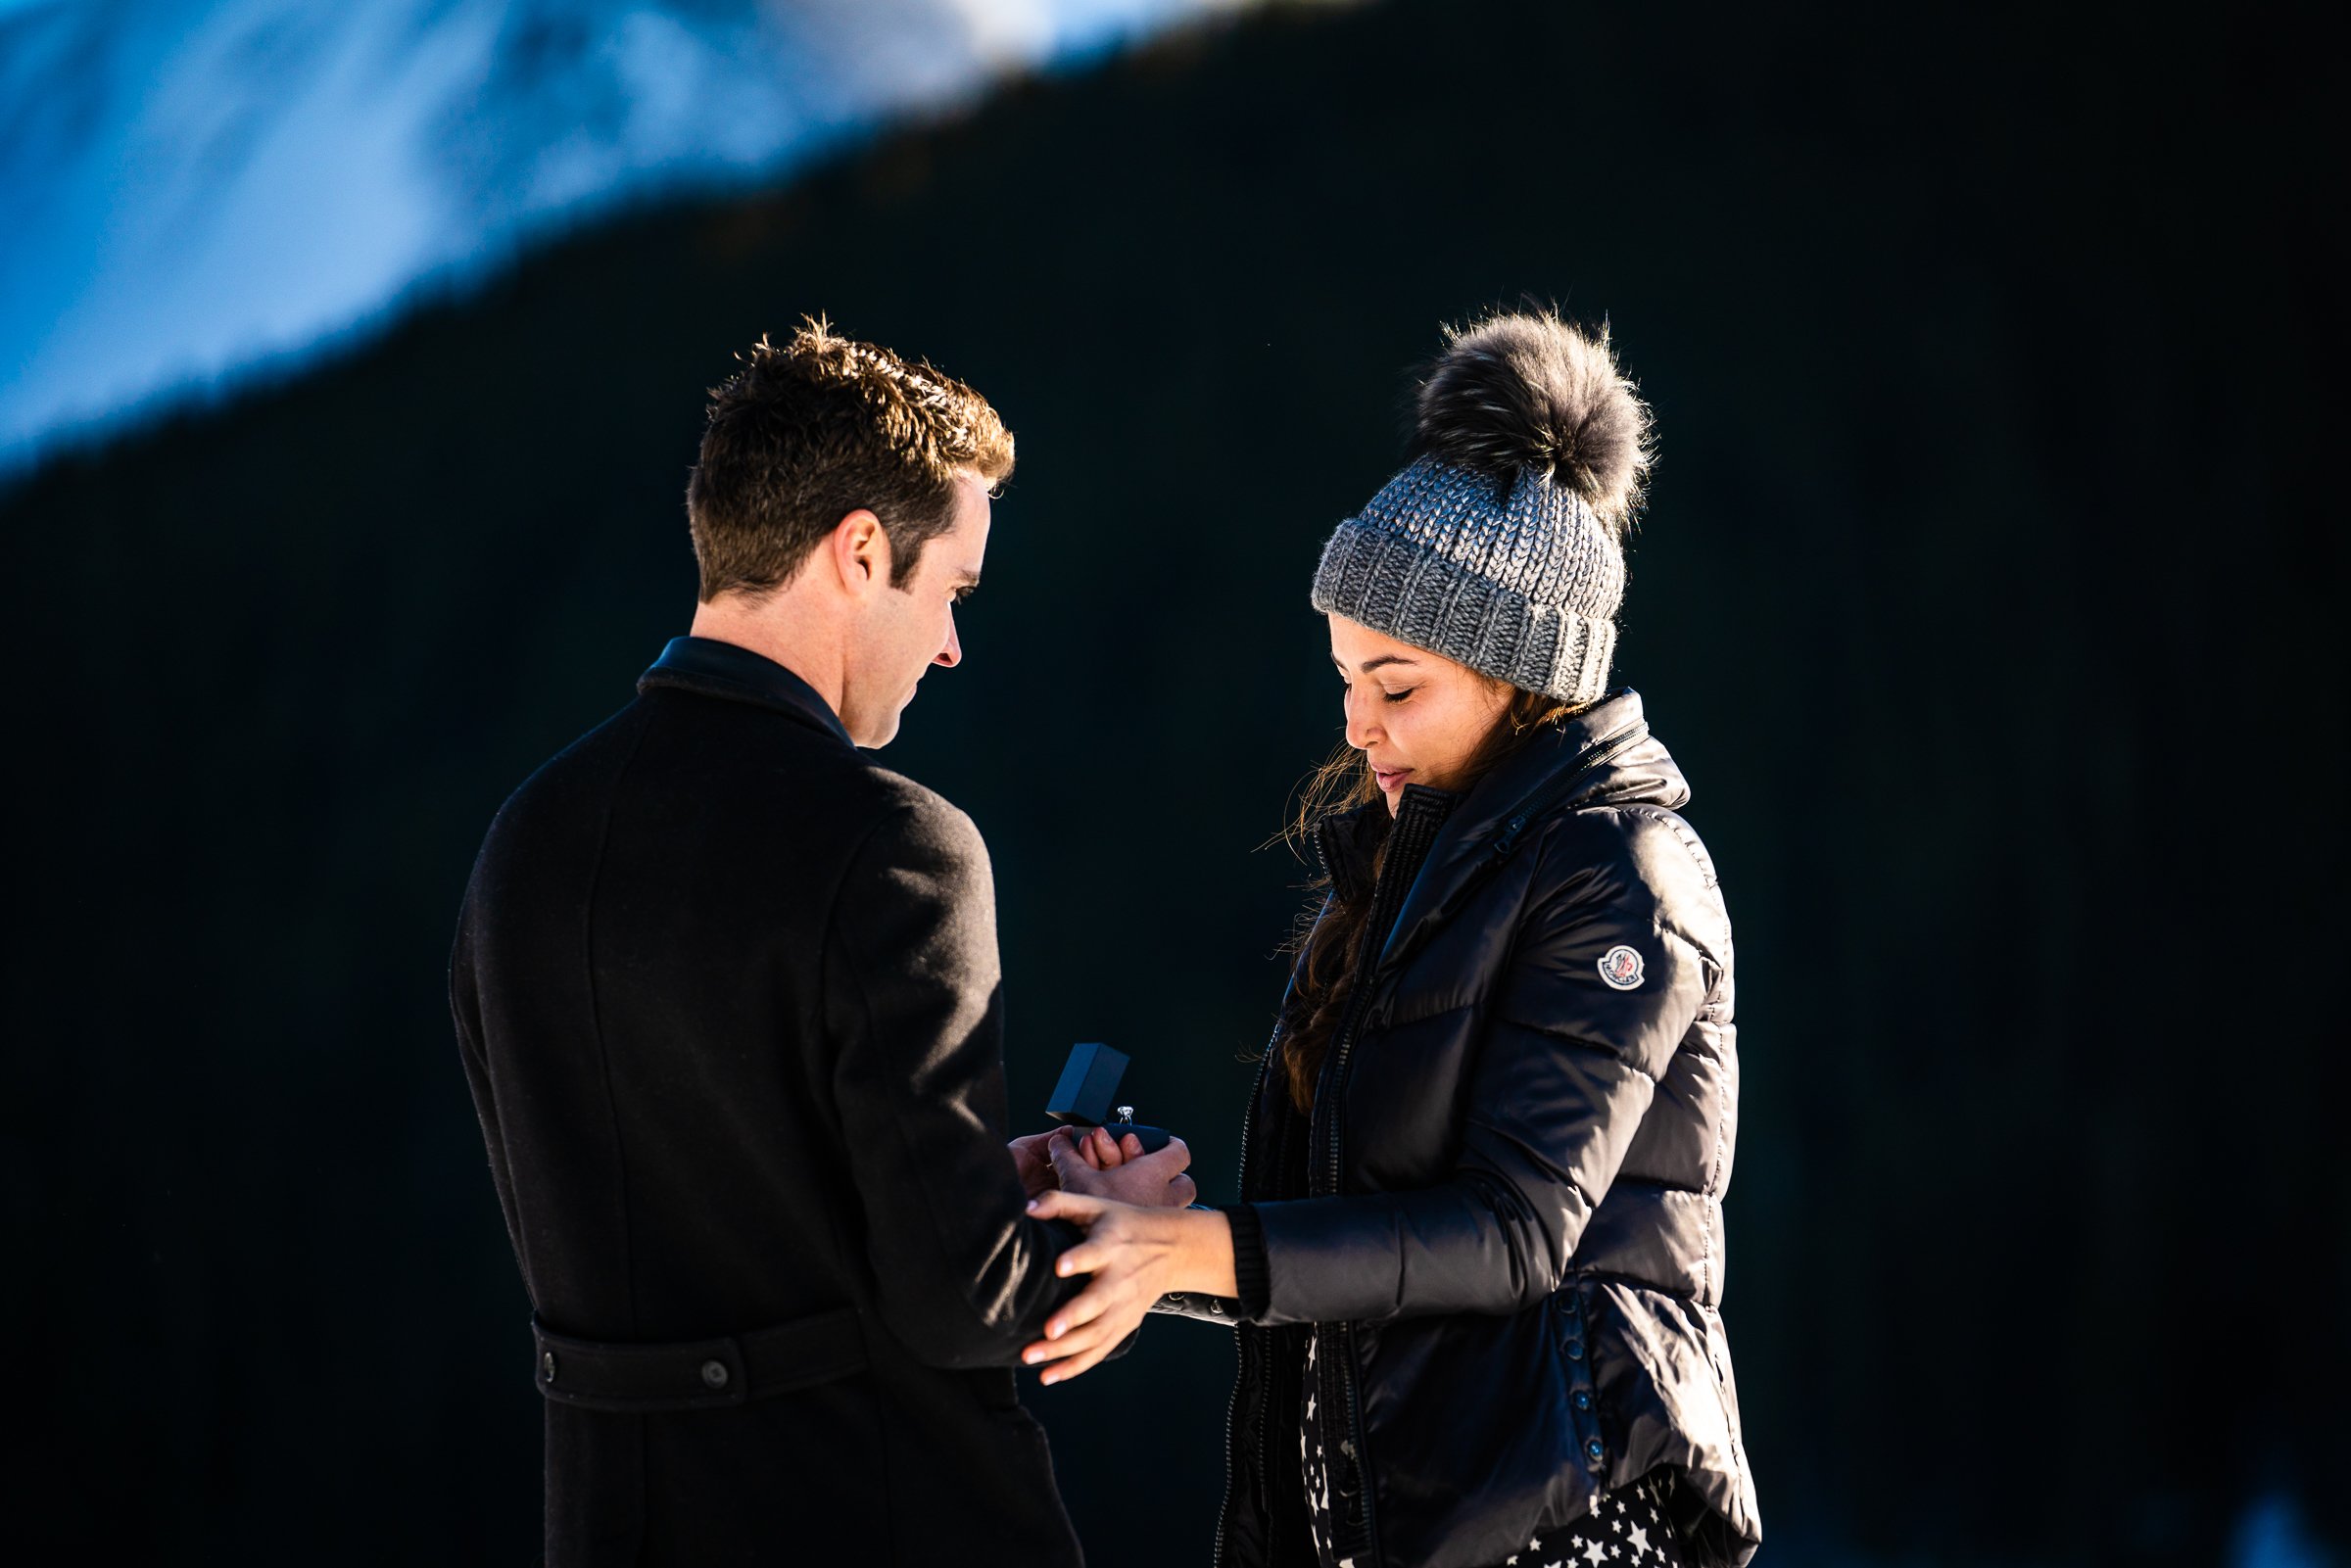 Man proposes to girlfriend while standing on a frozen lake with snowcapped mountains in the background, Engagement Session, Engagement Photos, Engagement Photos Inspiration, Engagement Photography, Engagement Photographer, Winter Engagement Photos, Proposal Photos, Proposal Photographer, Proposal Photography, Winter Proposal, Mountain Proposal, Proposal Inspiration, Summit County engagement session, Summit County engagement photos, Summit County engagement photography, Summit County engagement photographer, Summit County engagement inspiration, Colorado engagement session, Colorado engagement photos, Colorado engagement photography, Colorado engagement photographer, Colorado engagement inspiration, Clinton Gulch Engagement